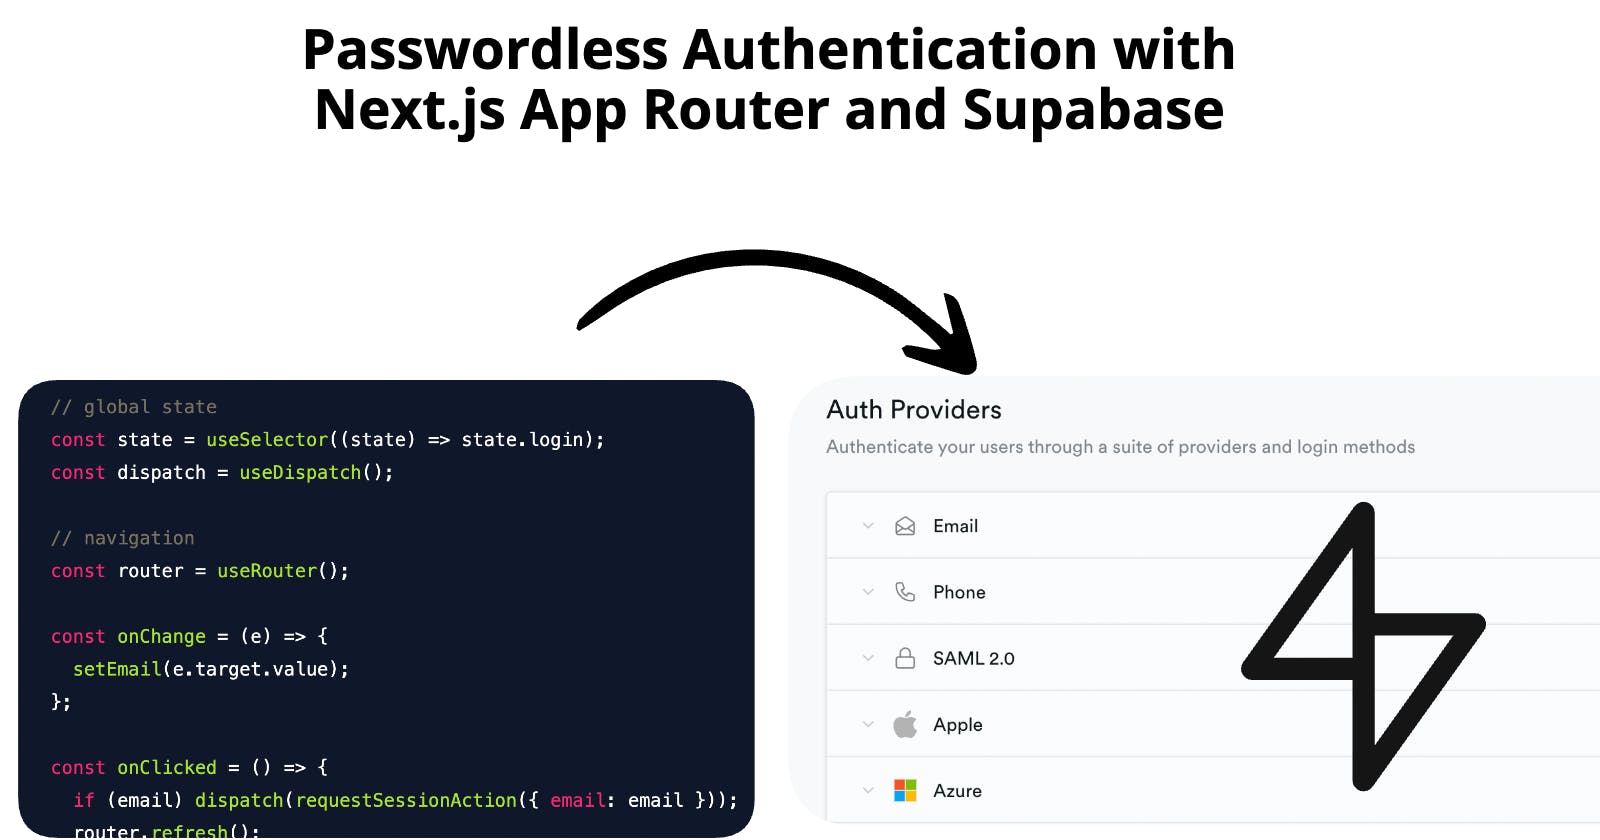 Passwordless Authentication with Next.js App Router and Supabase